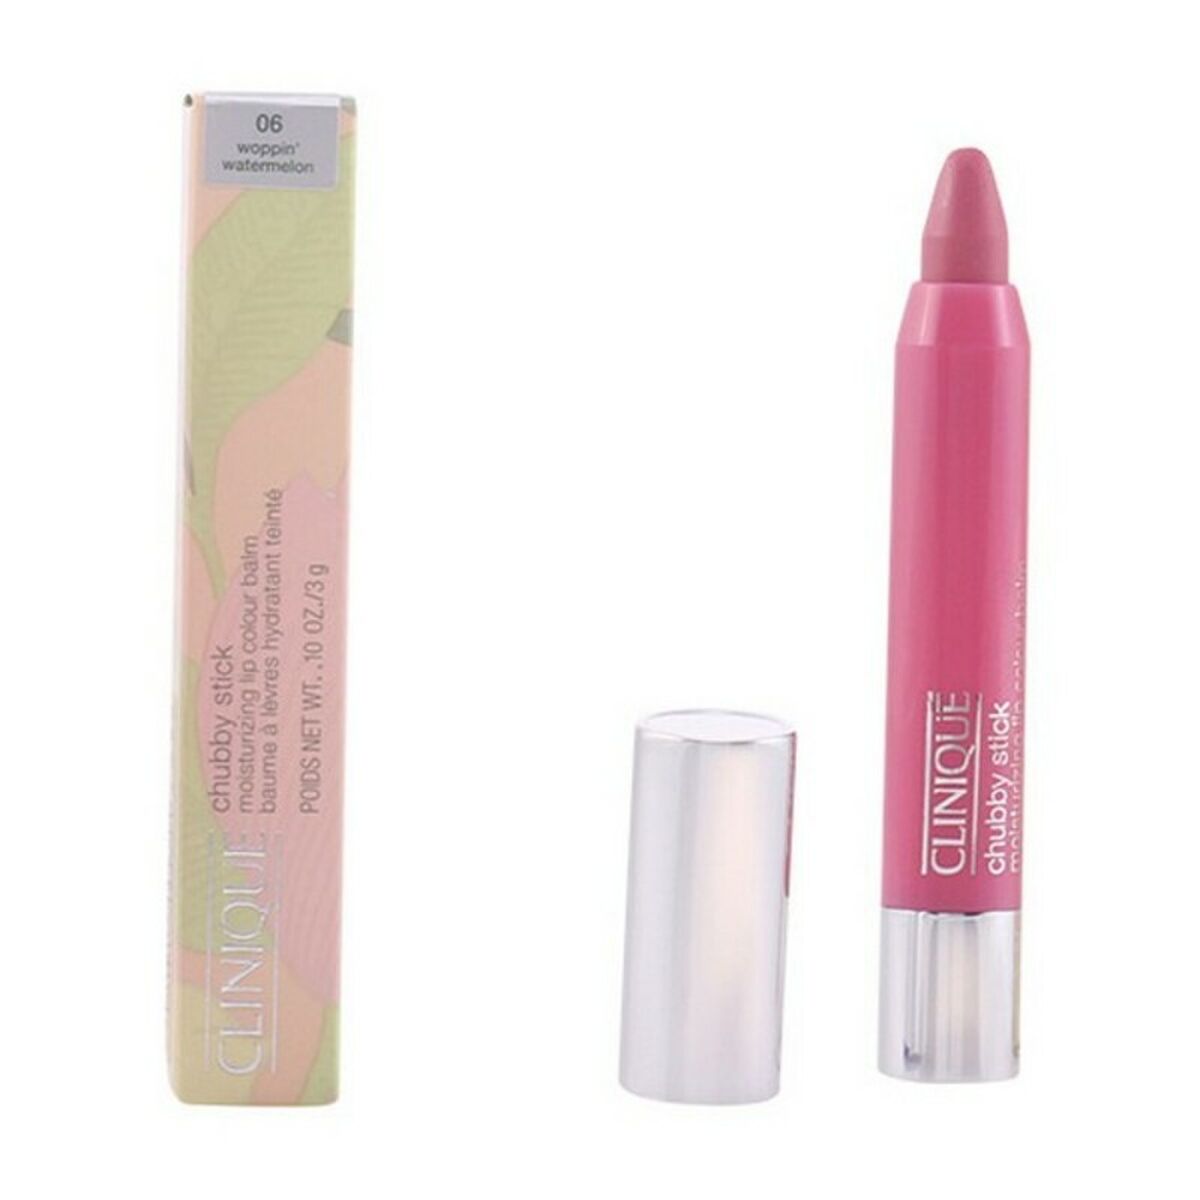 Farget Leppebalsam Chubby Stick Clinique